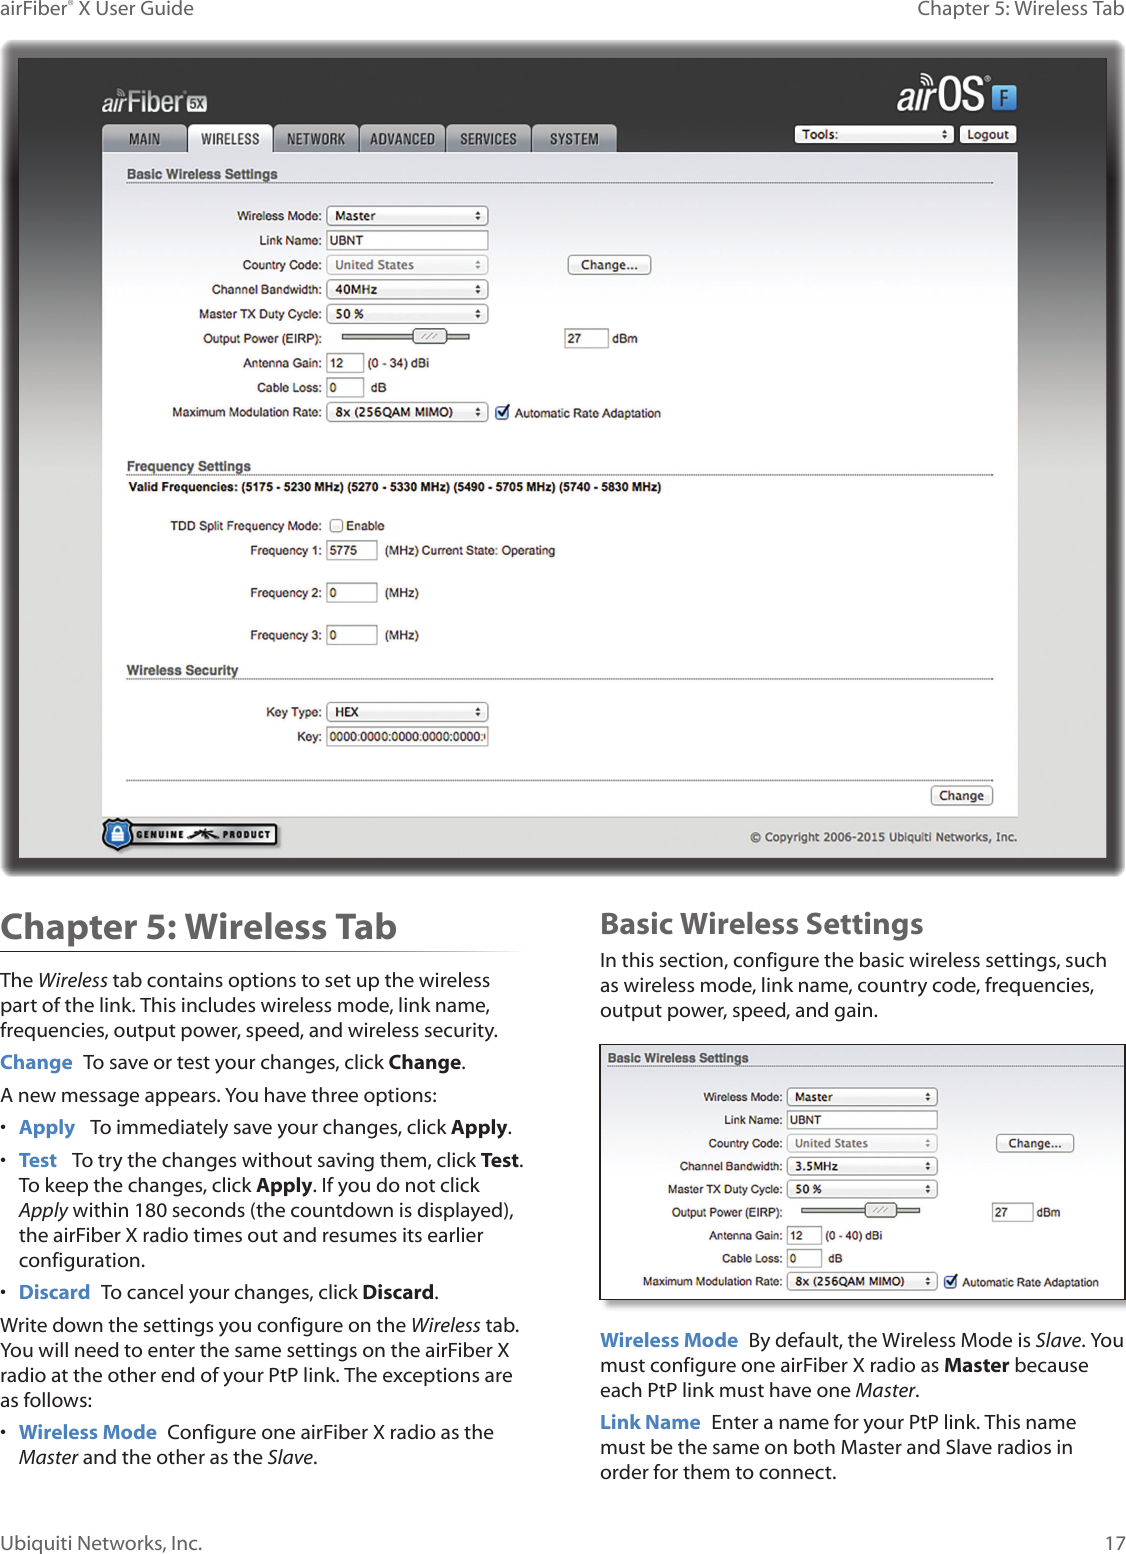 17Chapter 5: Wireless TabairFiber® X User GuideUbiquiti Networks, Inc.Chapter 5: Wireless TabThe Wireless tab contains options to set up the wireless part of the link. This includes wireless mode, link name, frequencies, output power, speed, and wireless security.Change  To save or test your changes, click Change.A new message appears. You have three options:•  Apply   To immediately save your changes, click Apply.•  Test   To try the changes without saving them, click Test. To keep the changes, click Apply. If you do not click Apply within 180 seconds (the countdown is displayed), the airFiberX radio times out and resumes its earlier configuration.•  Discard  To cancel your changes, click Discard.Write down the settings you configure on the Wireless tab. You will need to enter the same settings on the airFiberX radio at the other end of your PtP link. The exceptions are as follows:•  Wireless Mode  Configure one airFiberX radio as the Master and the other as the Slave. Basic Wireless SettingsIn this section, configure the basic wireless settings, such as wireless mode, link name, country code, frequencies, output power, speed, and gain.Wireless Mode  By default, the Wireless Mode is Slave. You must configure one airFiberX radio as Master because each PtP link must have one Master.Link Name  Enter a name for your PtP link. This name must be the same on both Master and Slave radios in order for them to connect.